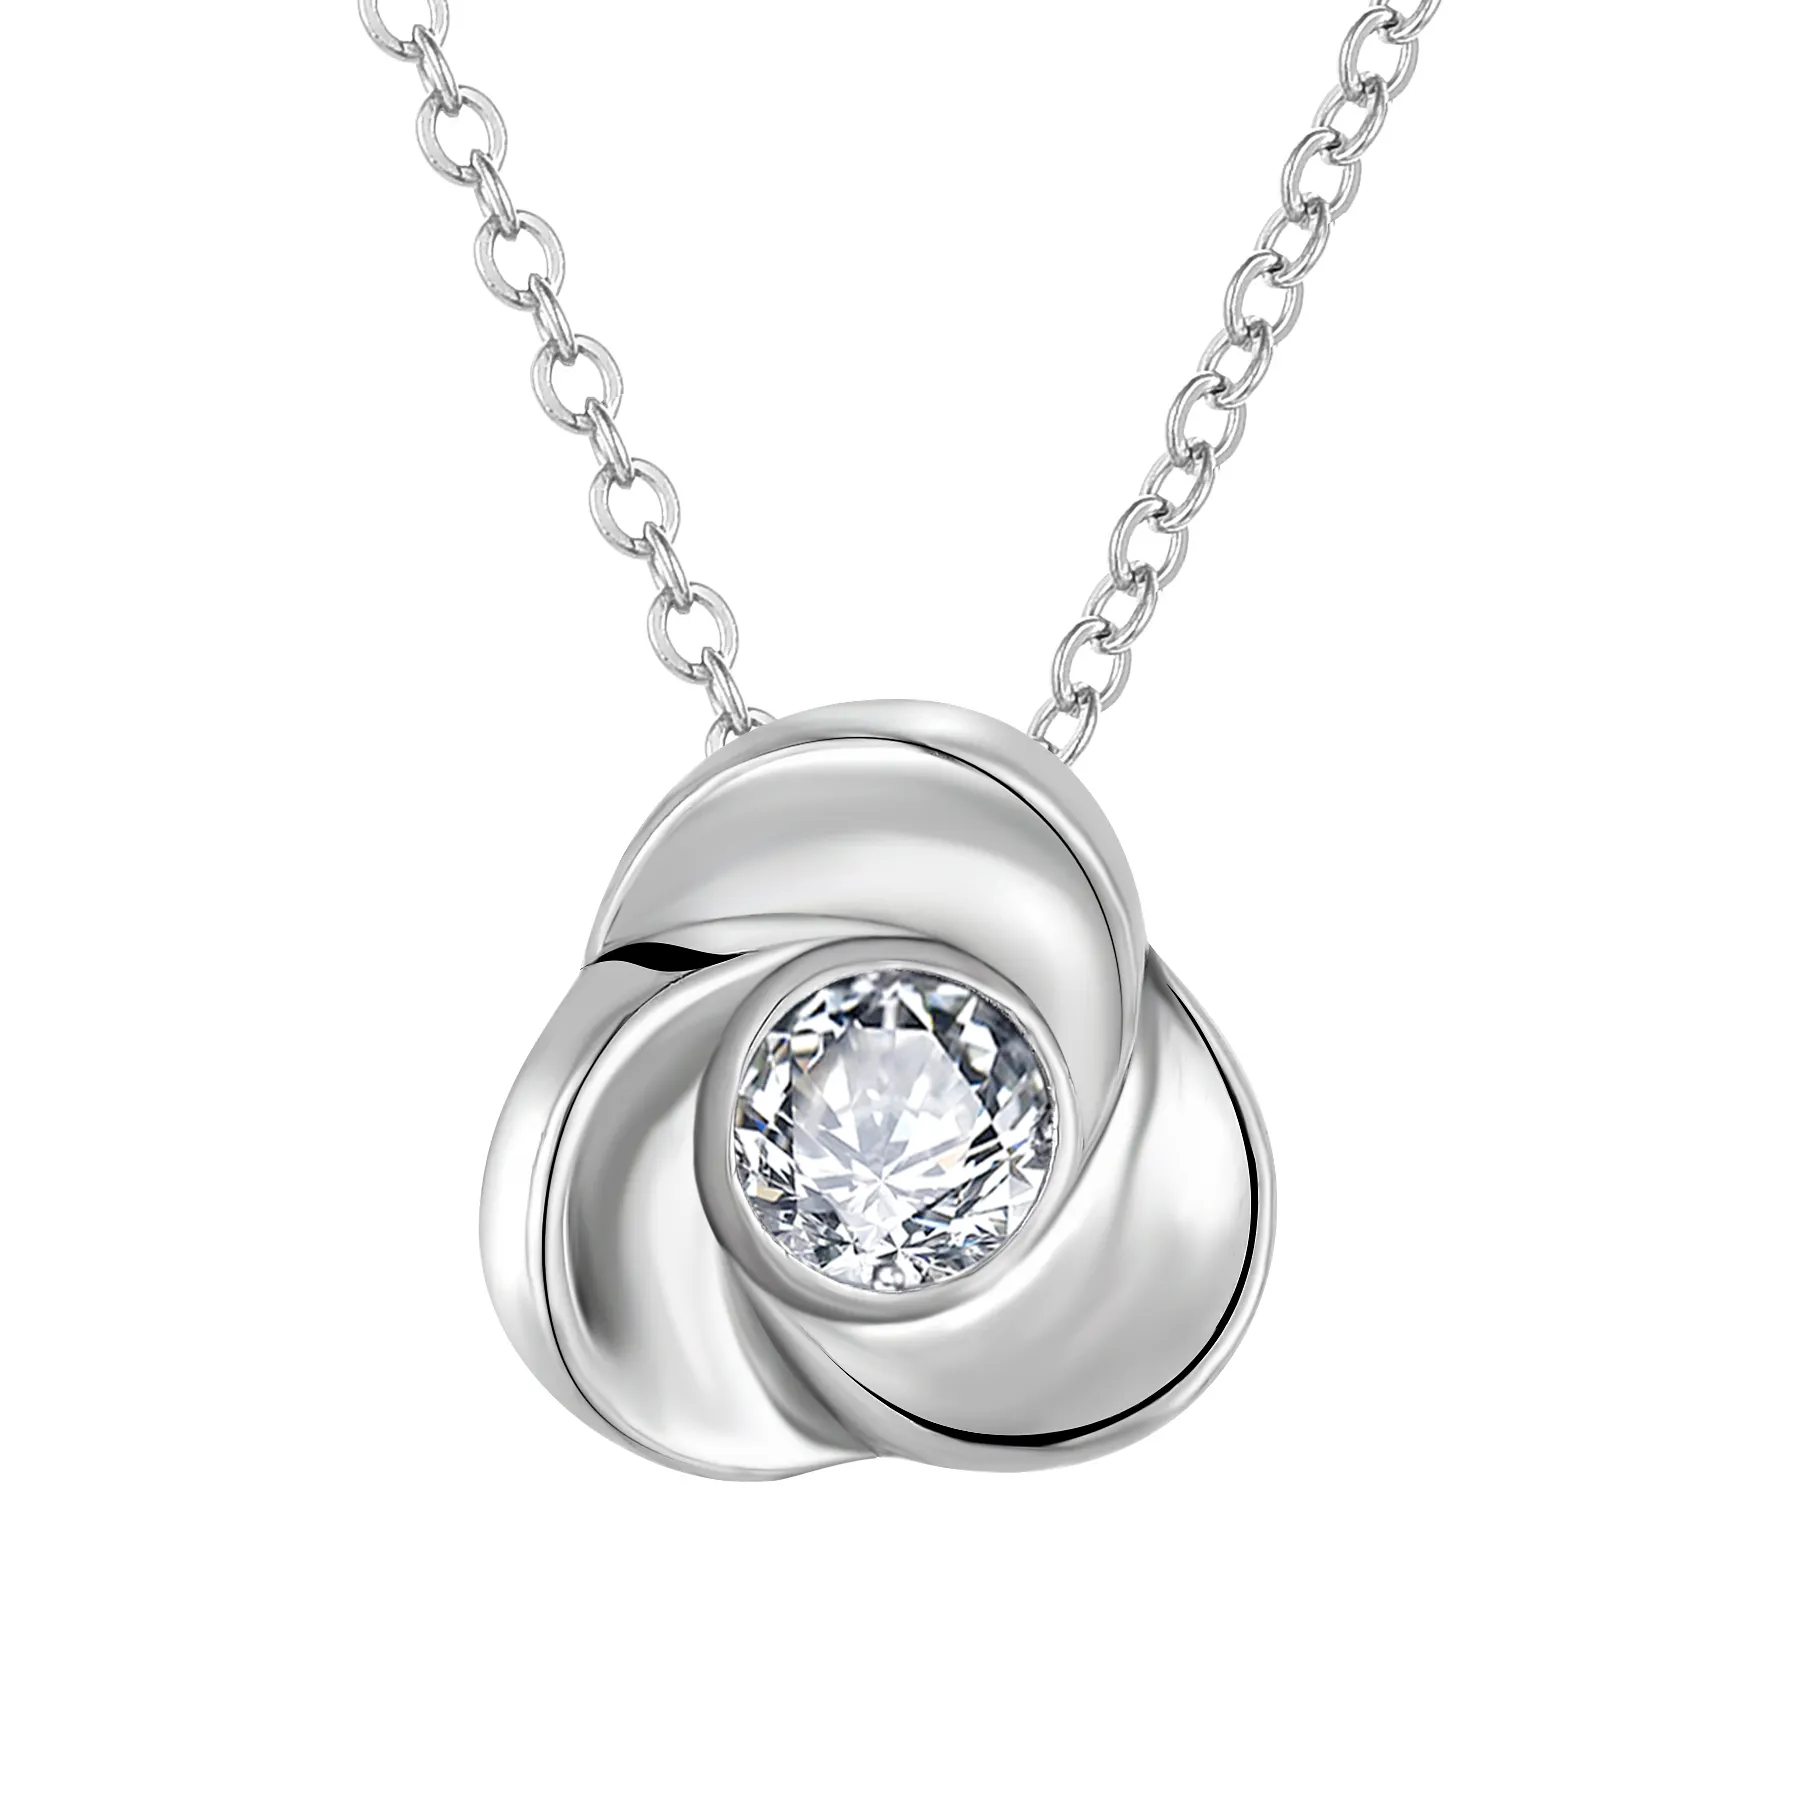 Most Popular 925 Sterling Silver Dipped Rhodium Plated Real Rose Necklace Jewelry Romantic Rose Flower Pendant Necklace